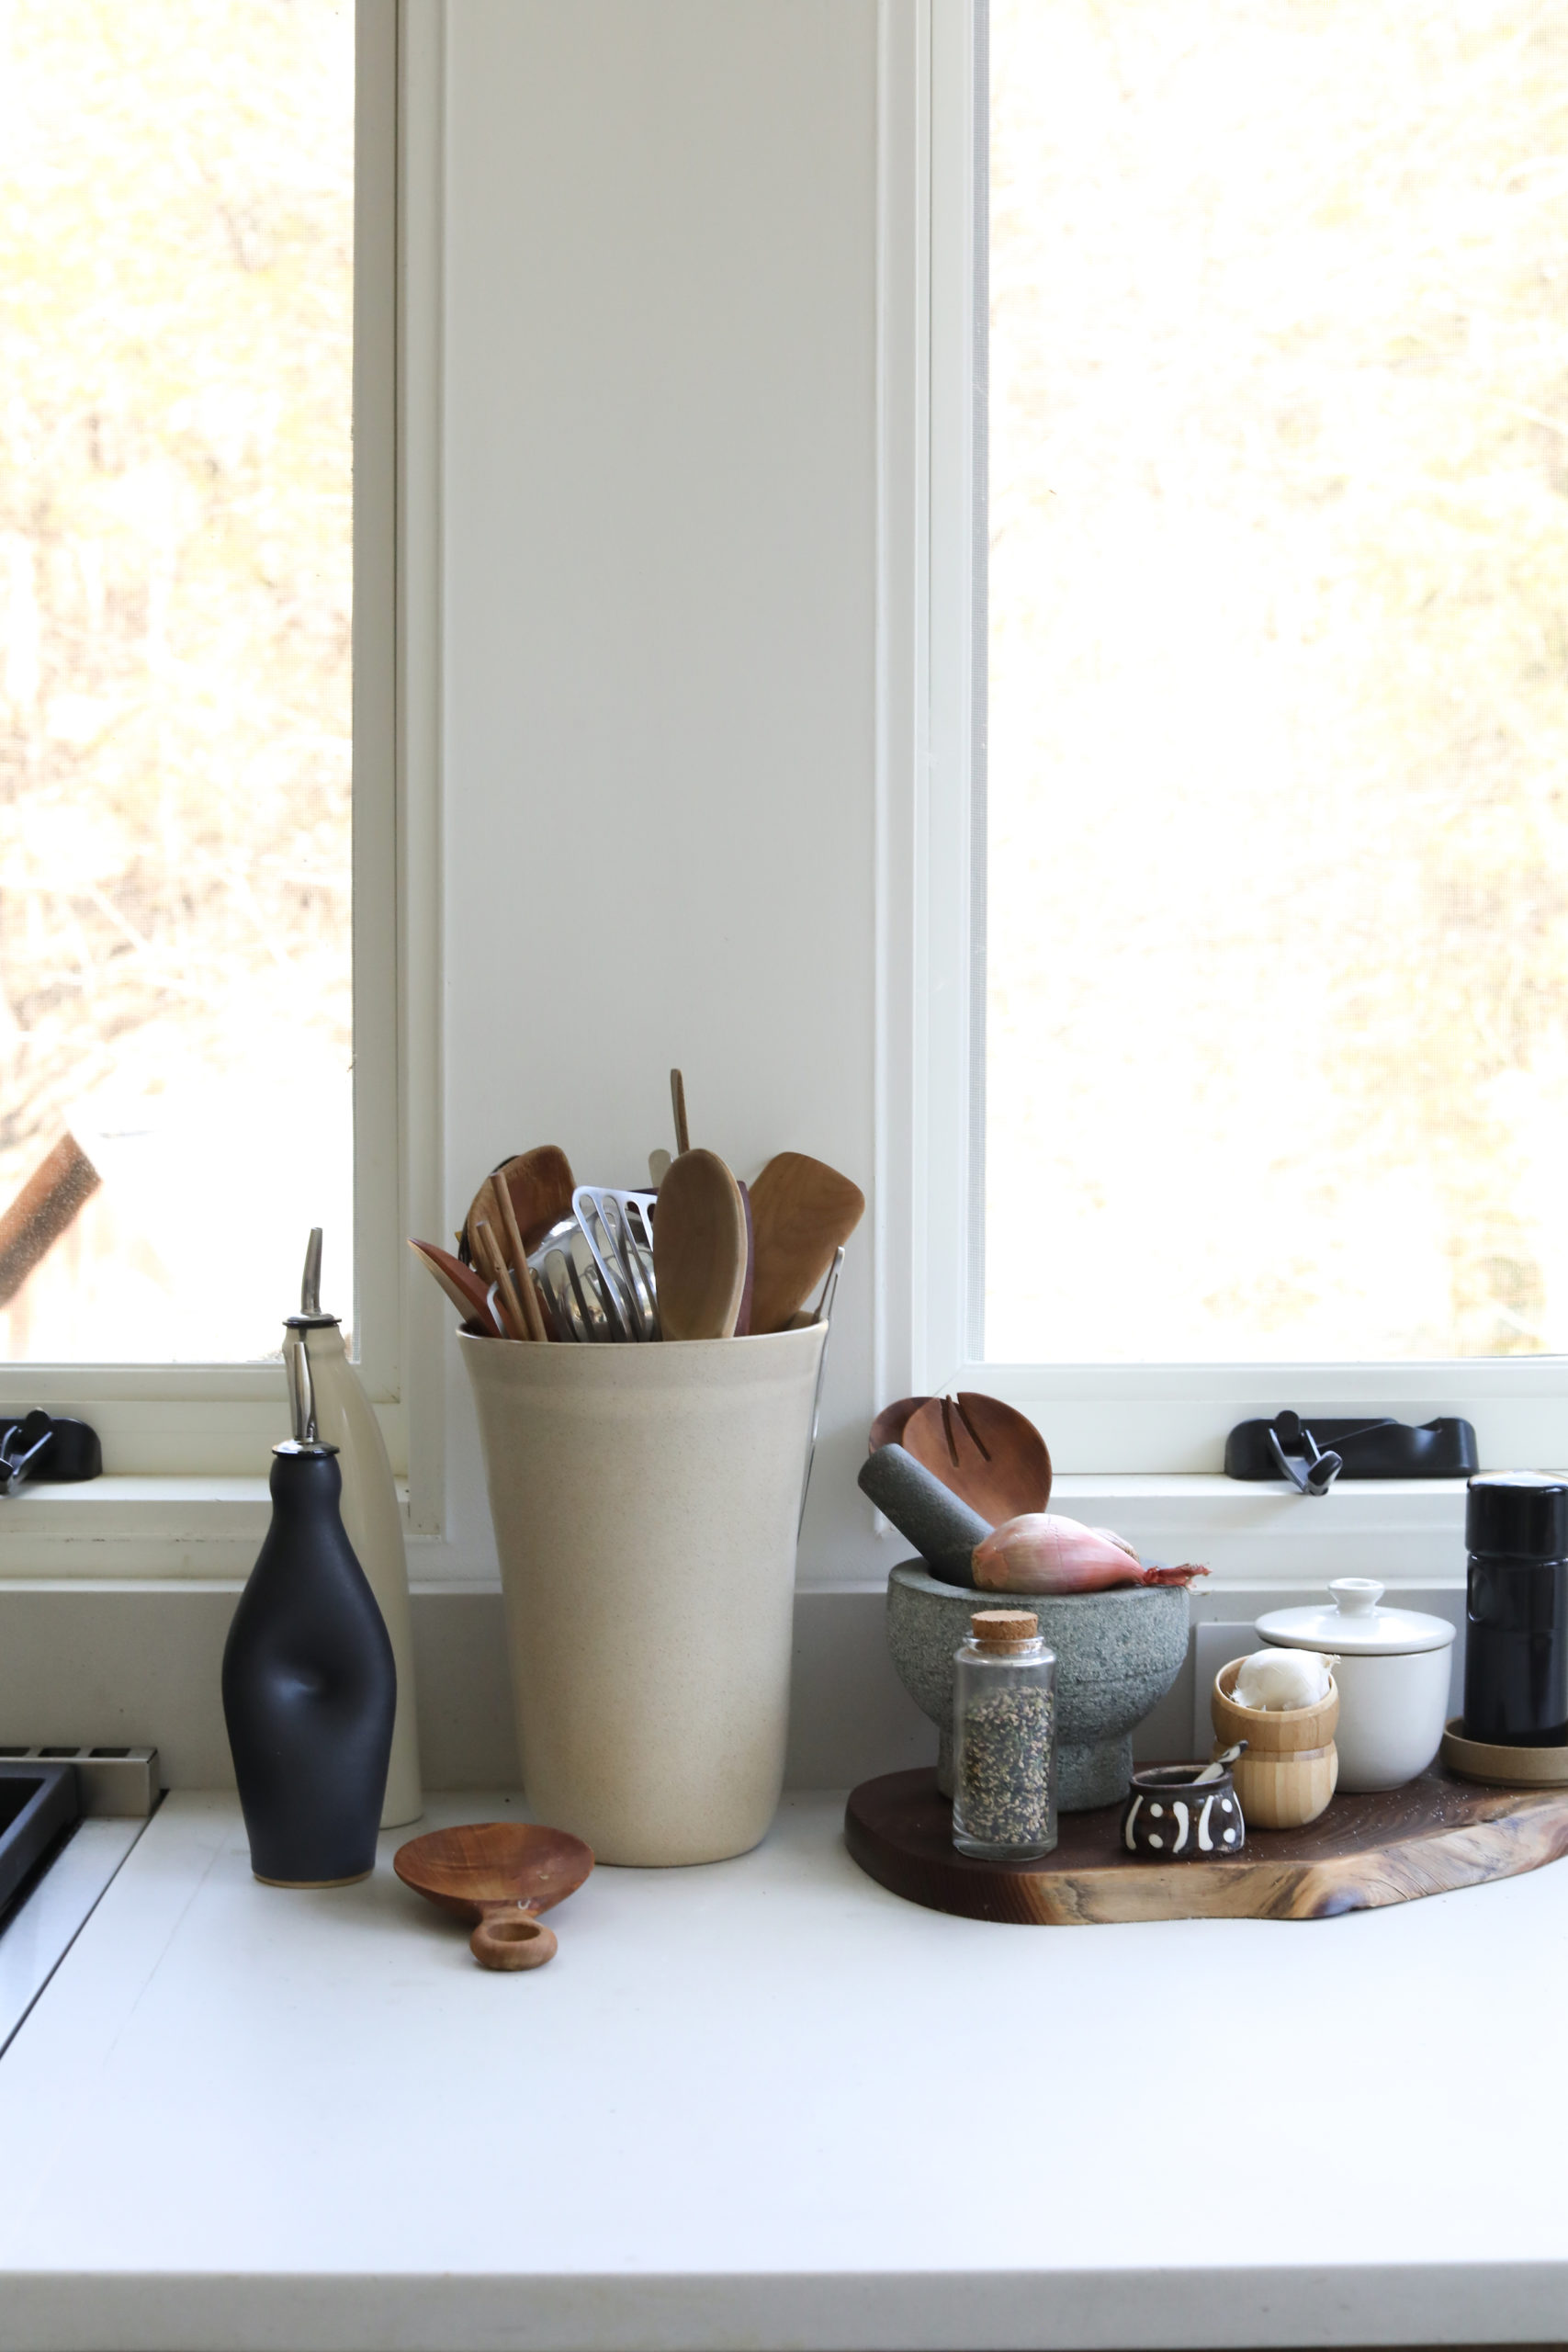 Ultimate List of Kitchen Essentials: Must Haves for Your Kitchen